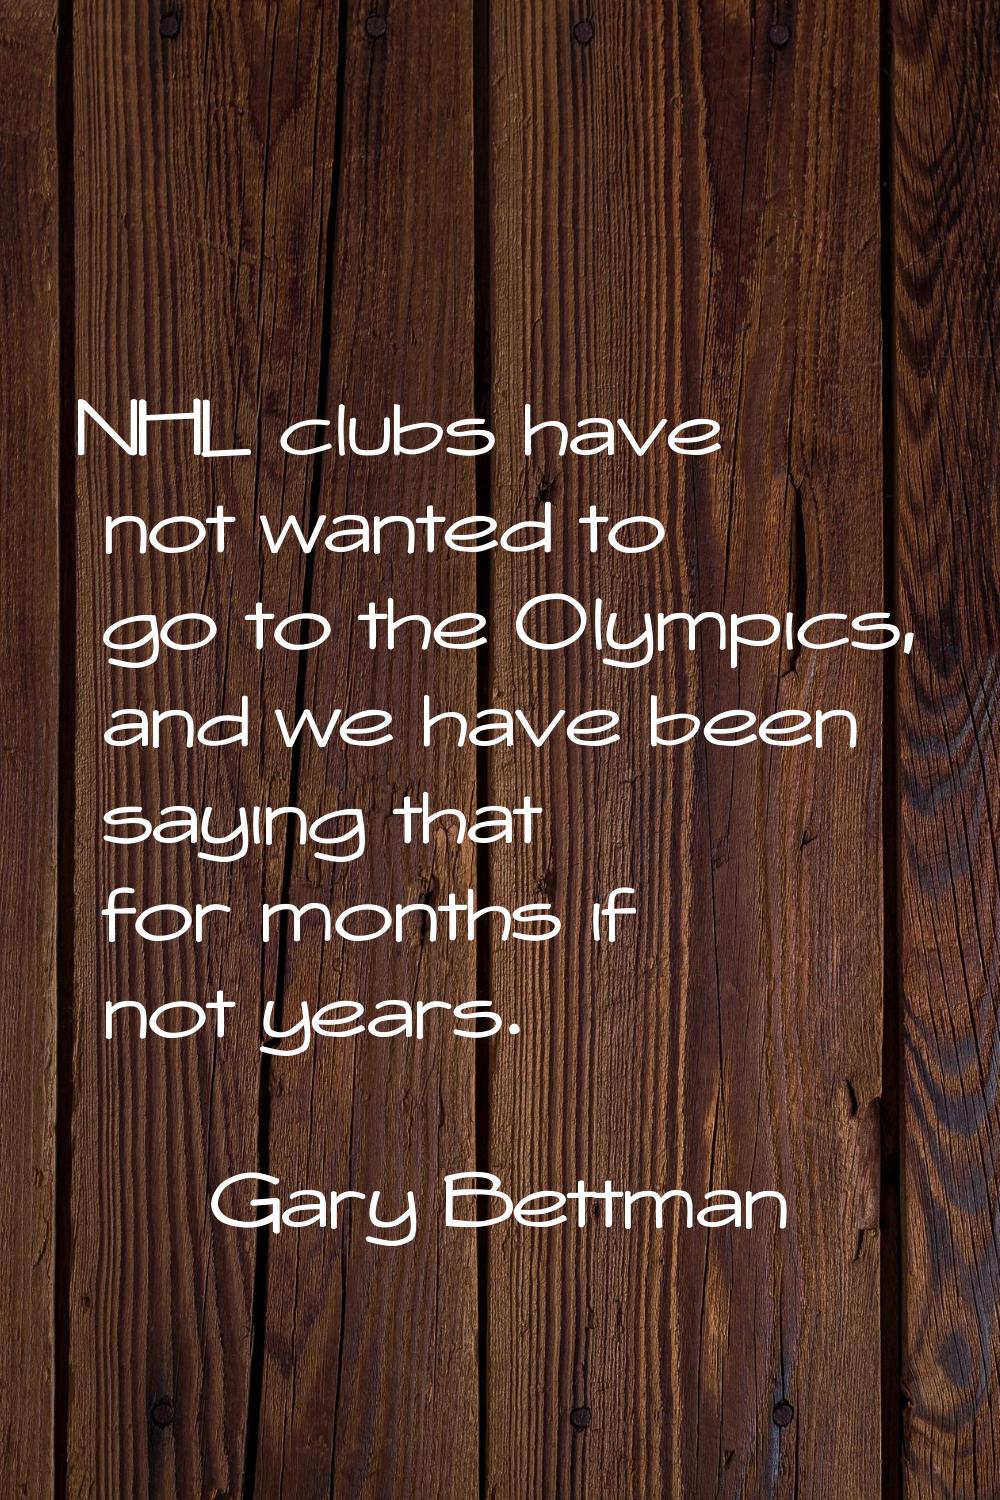 NHL clubs have not wanted to go to the Olympics, and we have been saying that for months if not yea